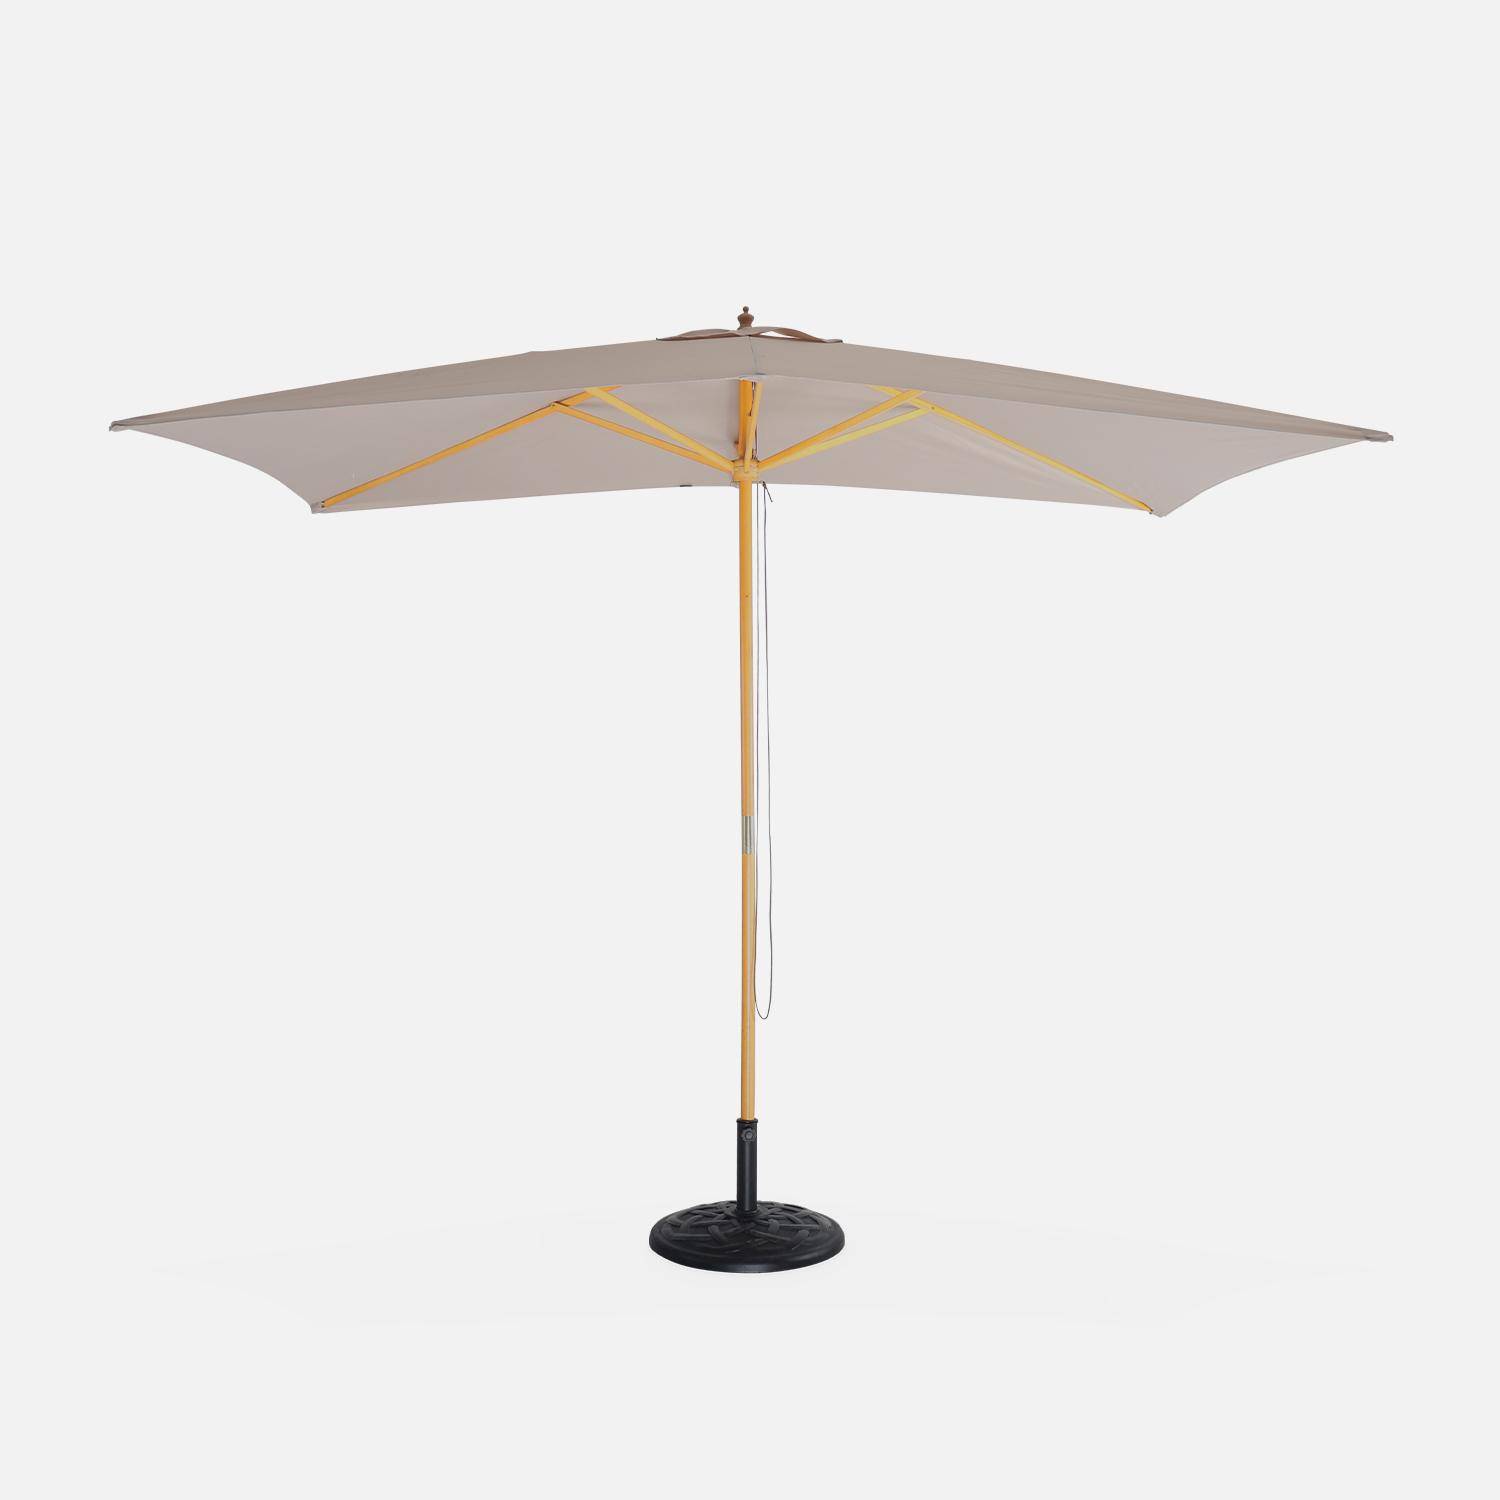 Straight rectangular wooden parasol 2x3m - adjustable central mast in wood and hand pulley opening - Cabourg - Beige Photo2